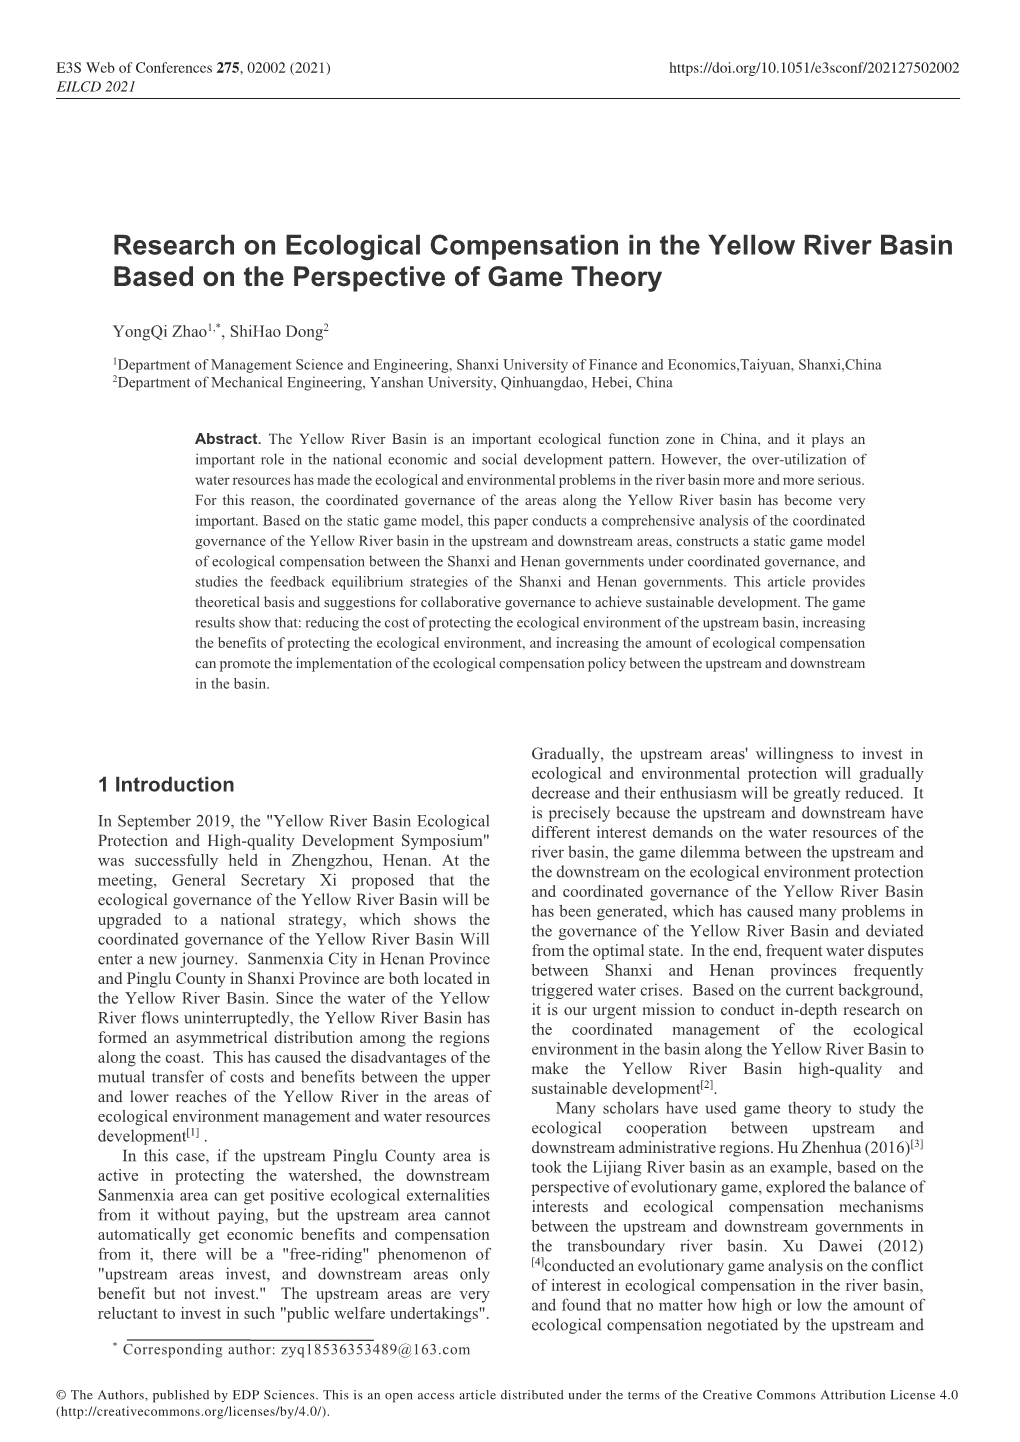 Research on Ecological Compensation in the Yellow River Basin Based on the Perspective of Game Theory